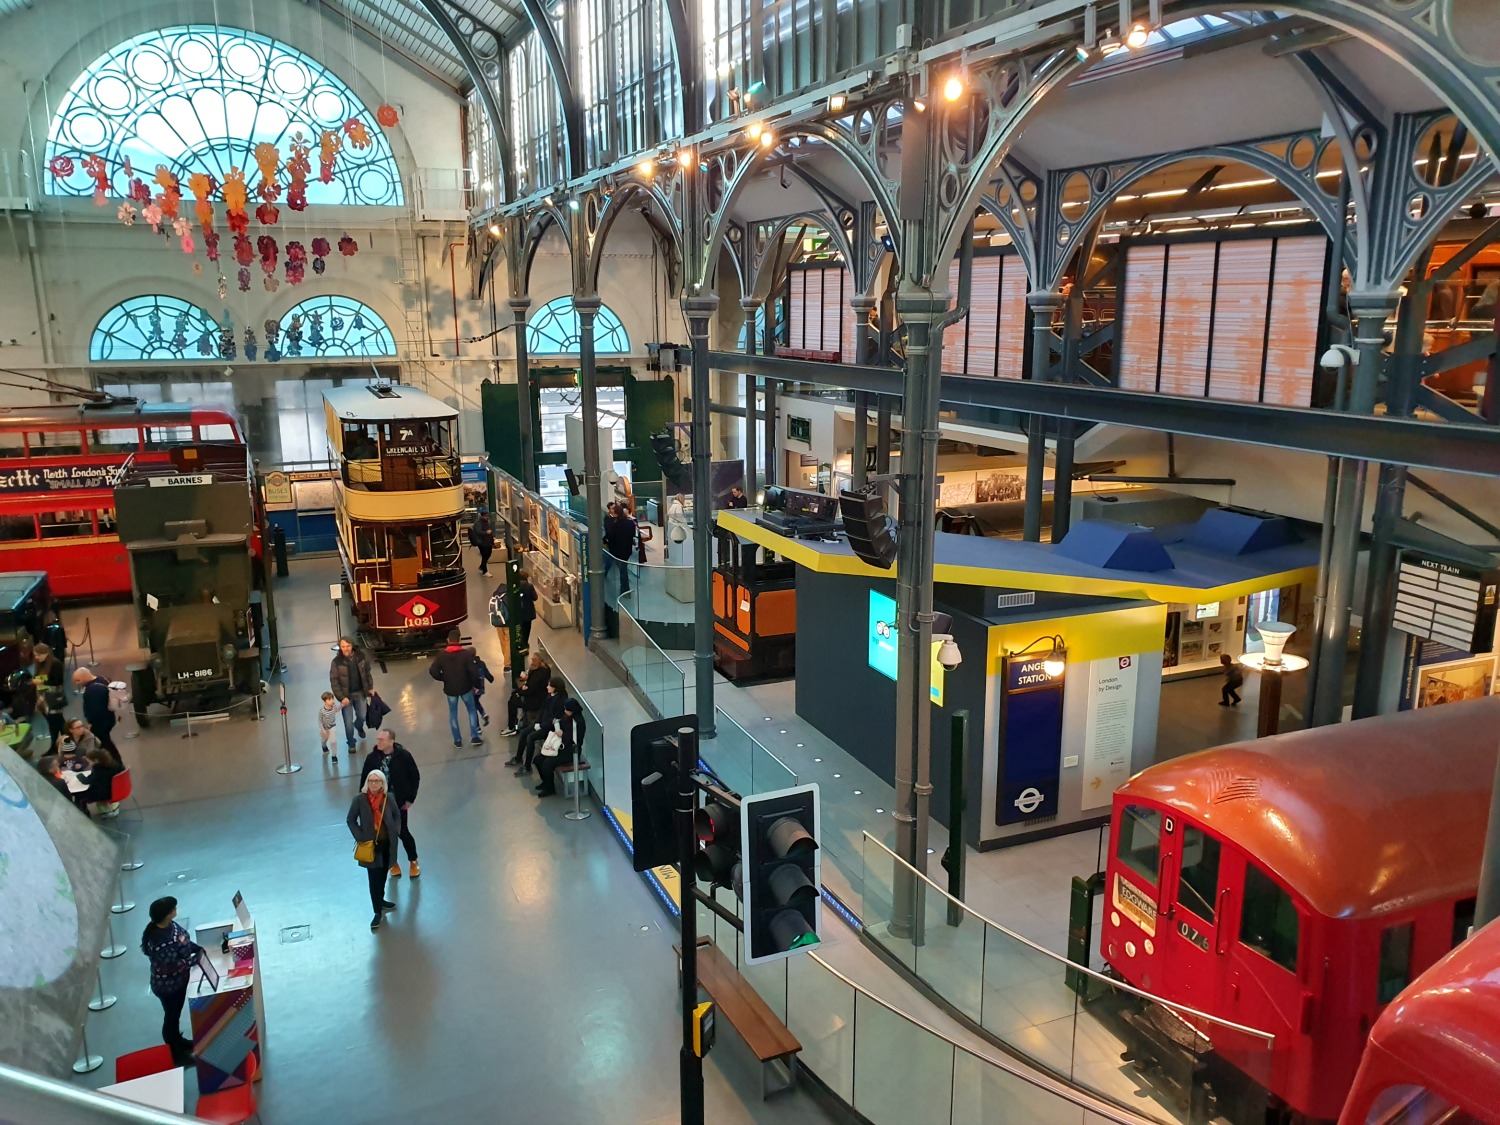 View of some of the vintage vehicles in the main hall of the London Transport Museum - a visit to check out the London Transport Museum Christmas events